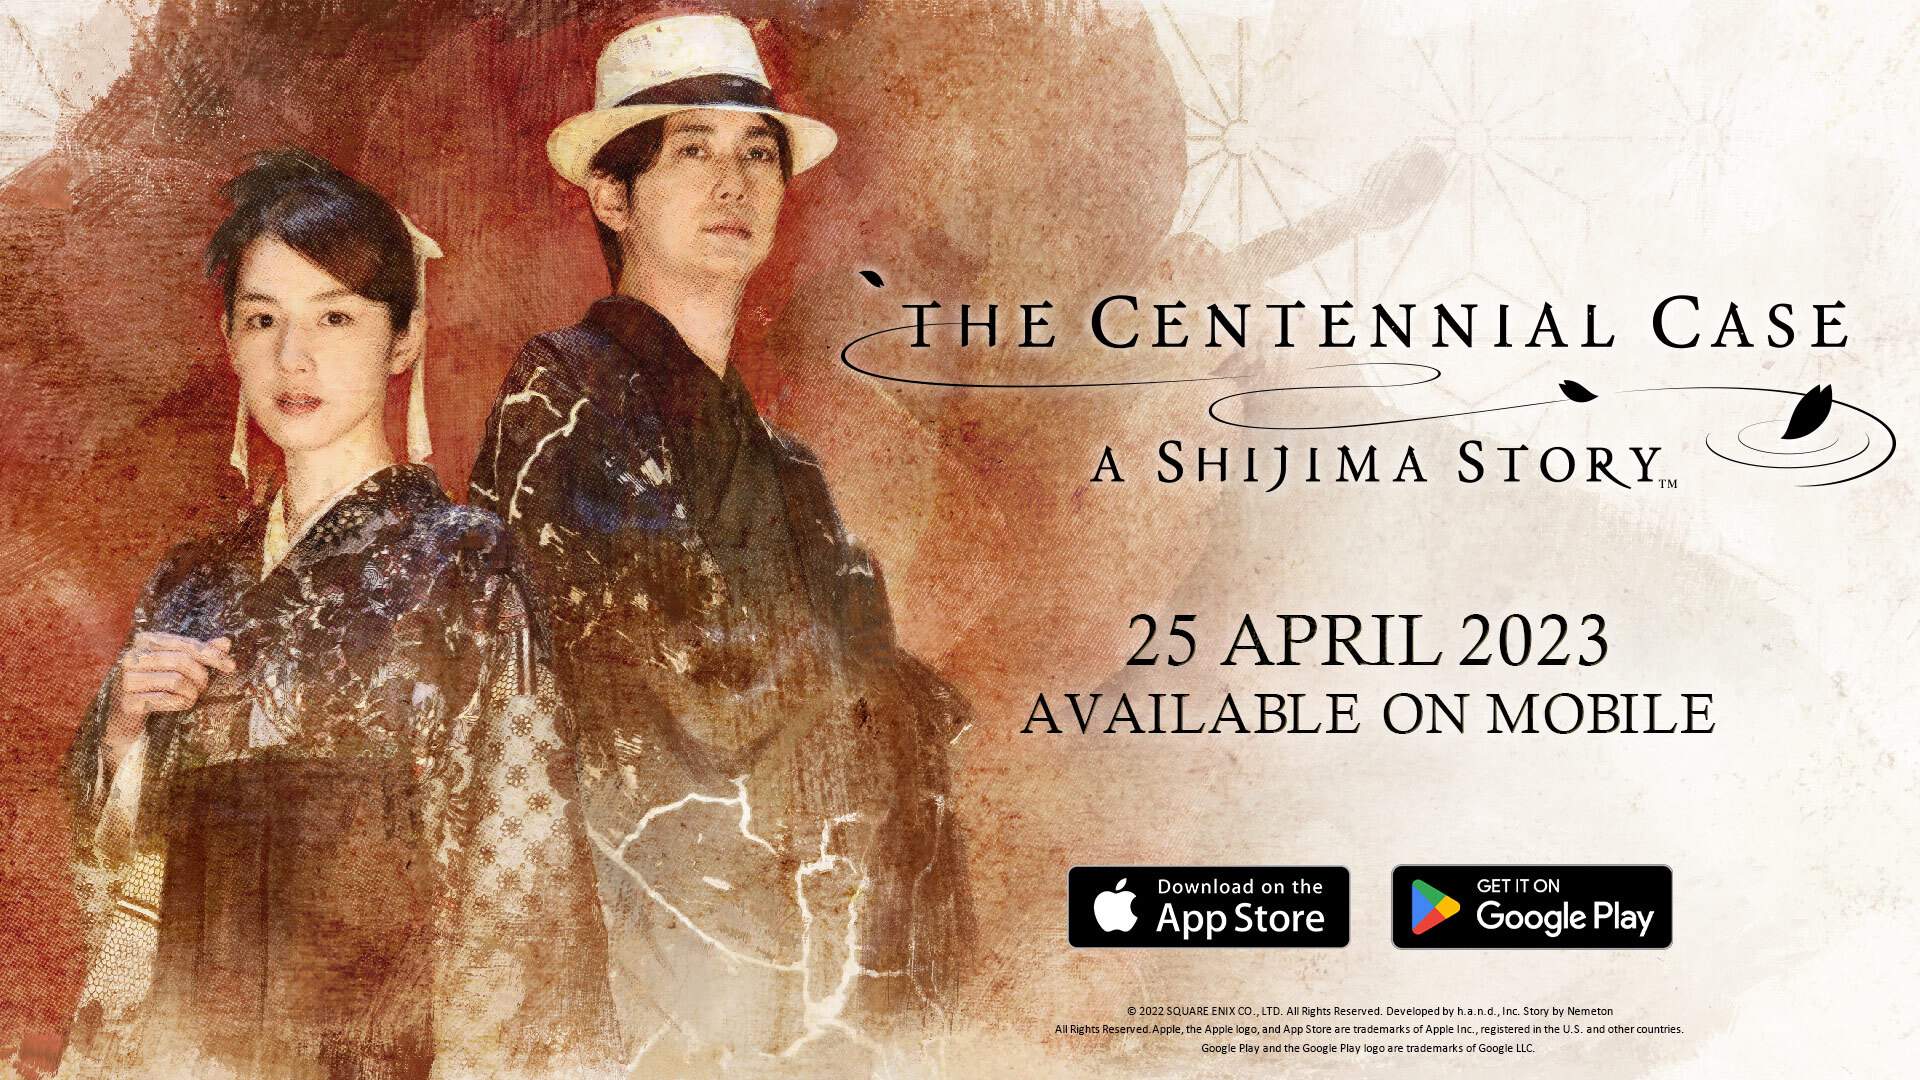 The Centennial Case: A Shijima Story available on mobile